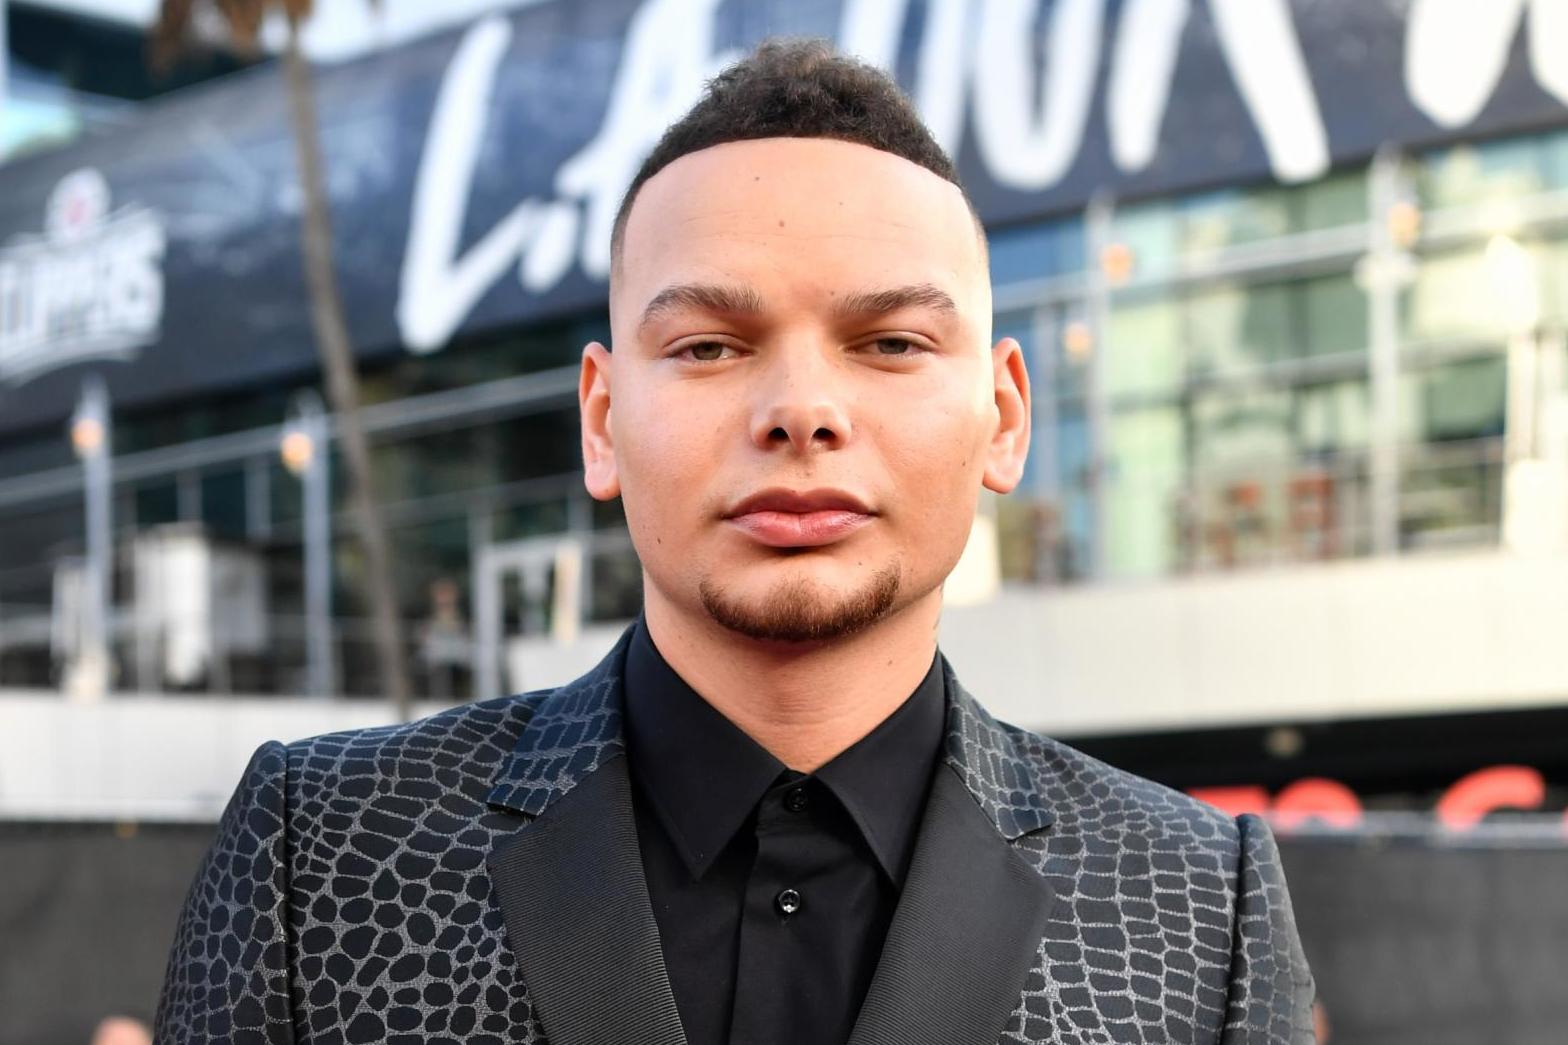 Kane Brown at the American Music Awards on 24 November 2019 in Los Angeles, California.